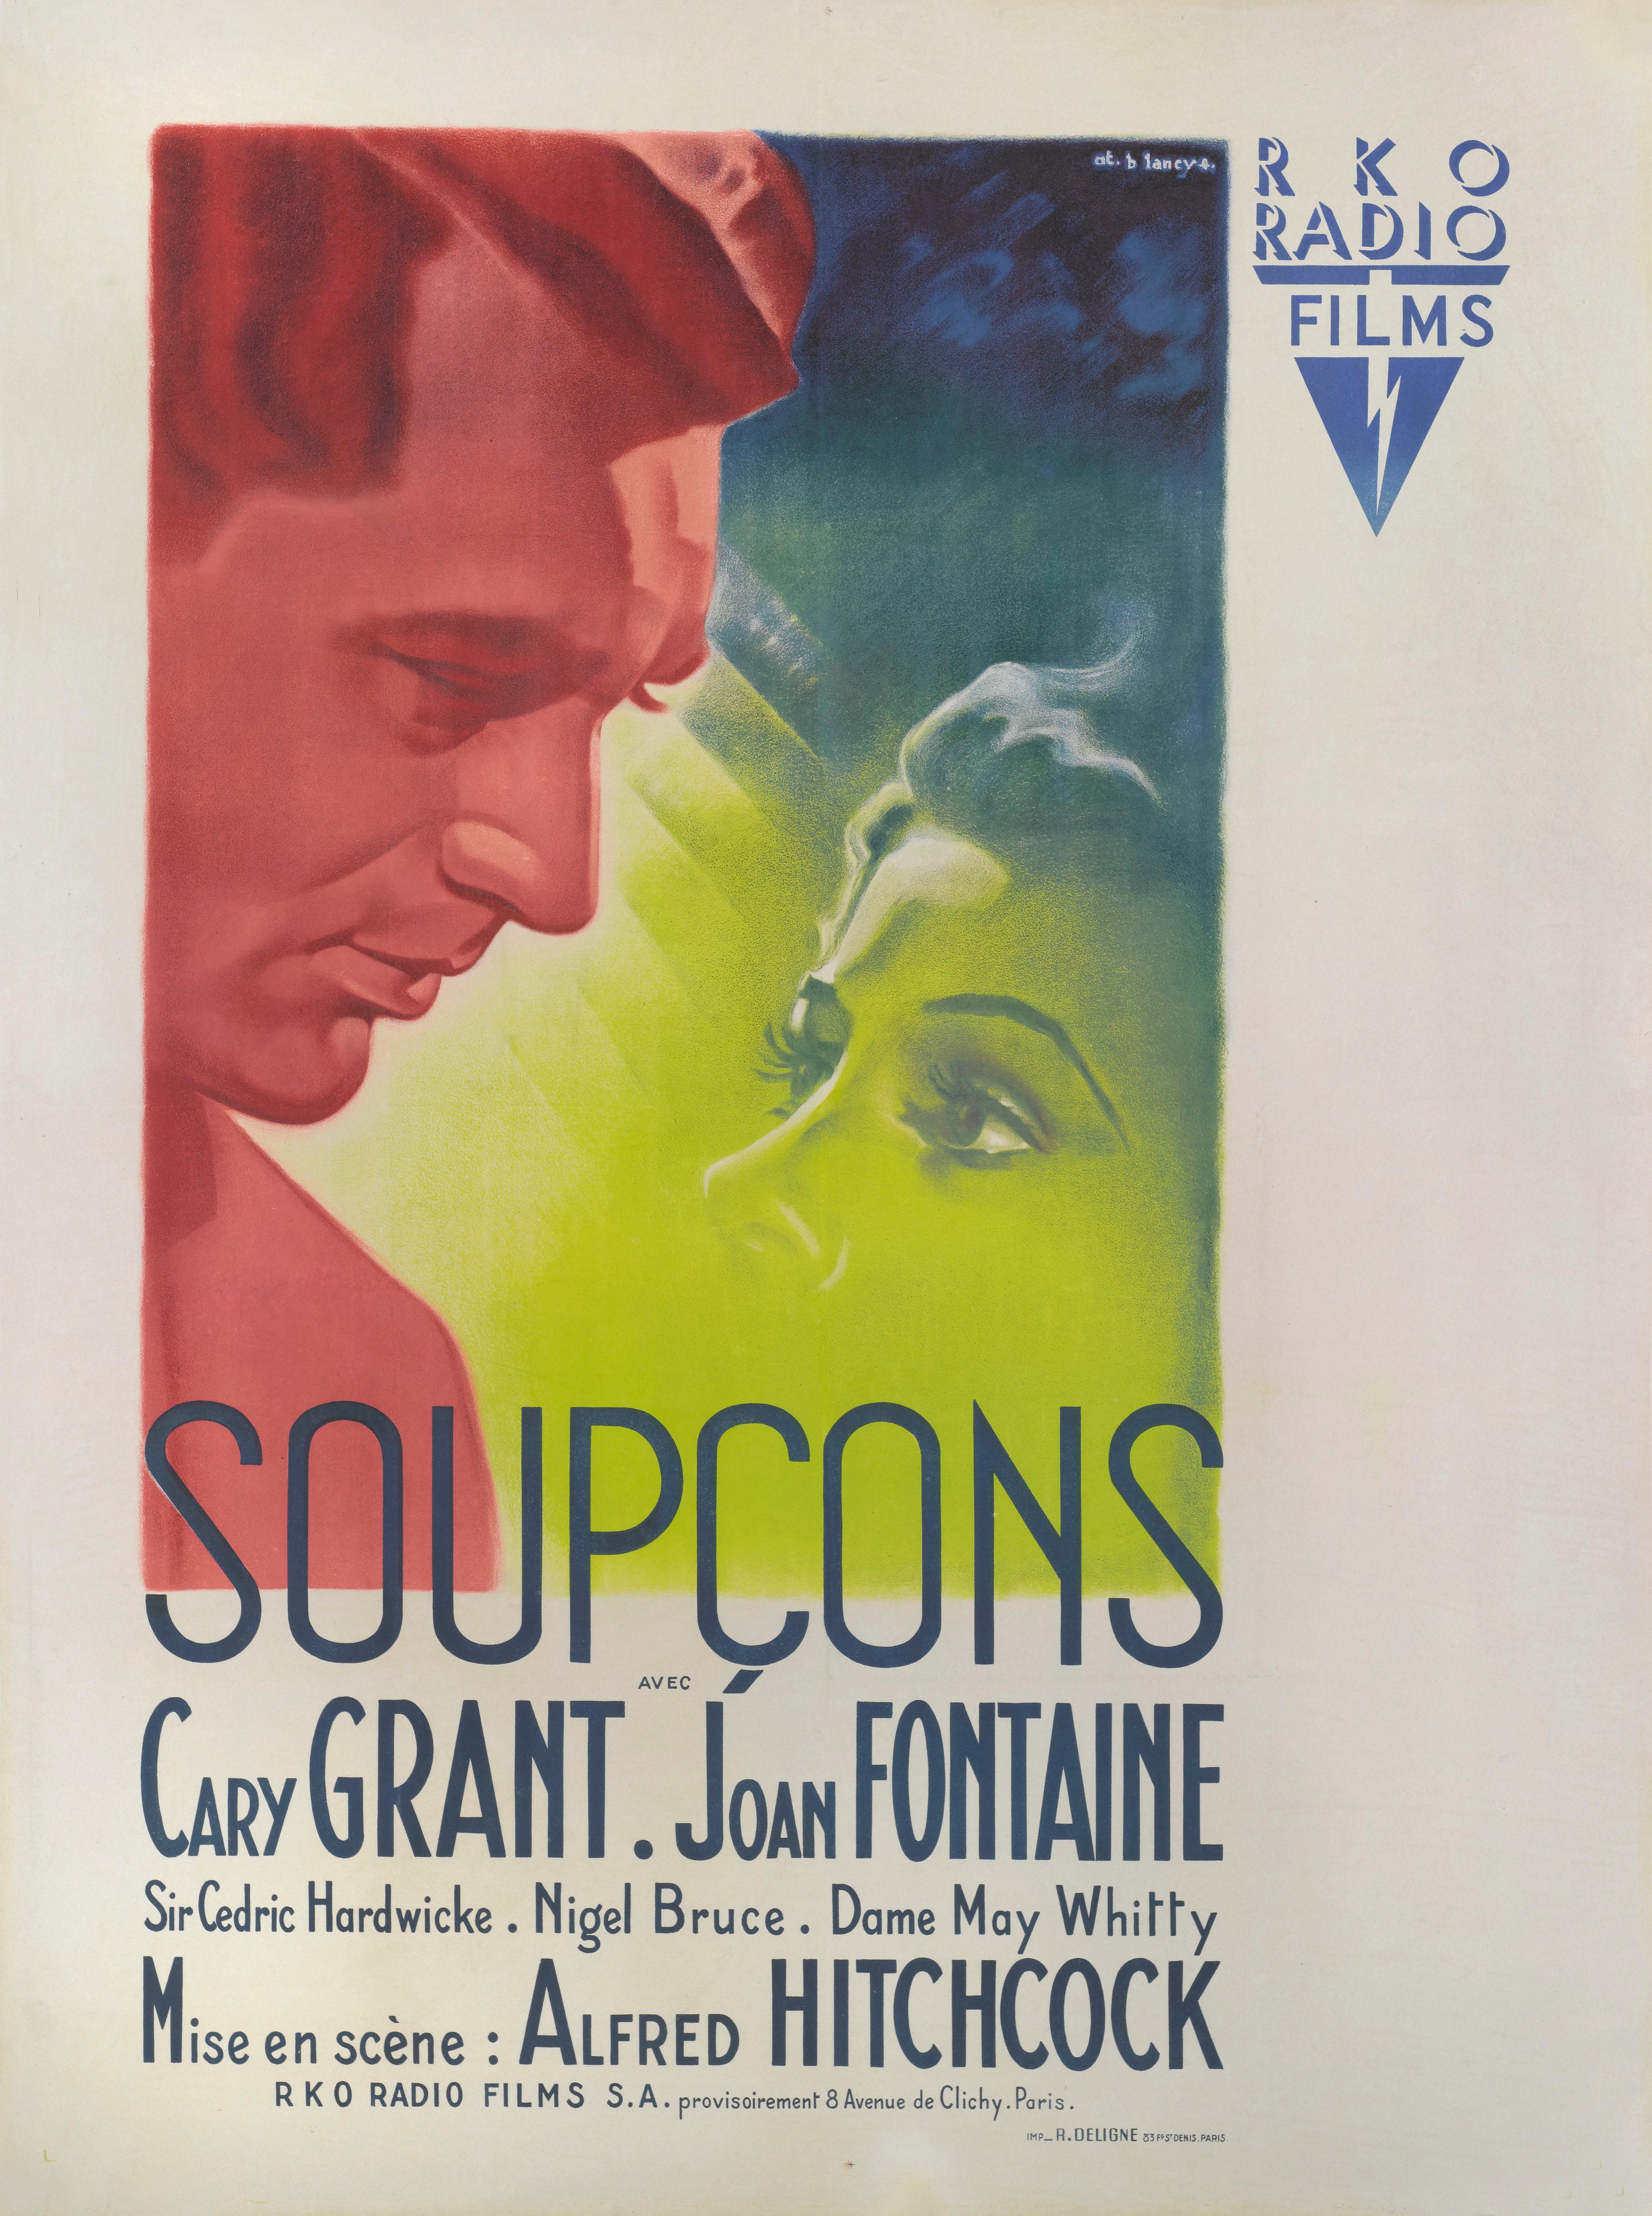 Original French film poster for Suspicion, 1941 
Measures: 63 x 47 in. (160 x 119 cm) This poster would have been displayed by pasting it to bill boards. Believed to be one of only three known surviving examples.
This poster has been conservation